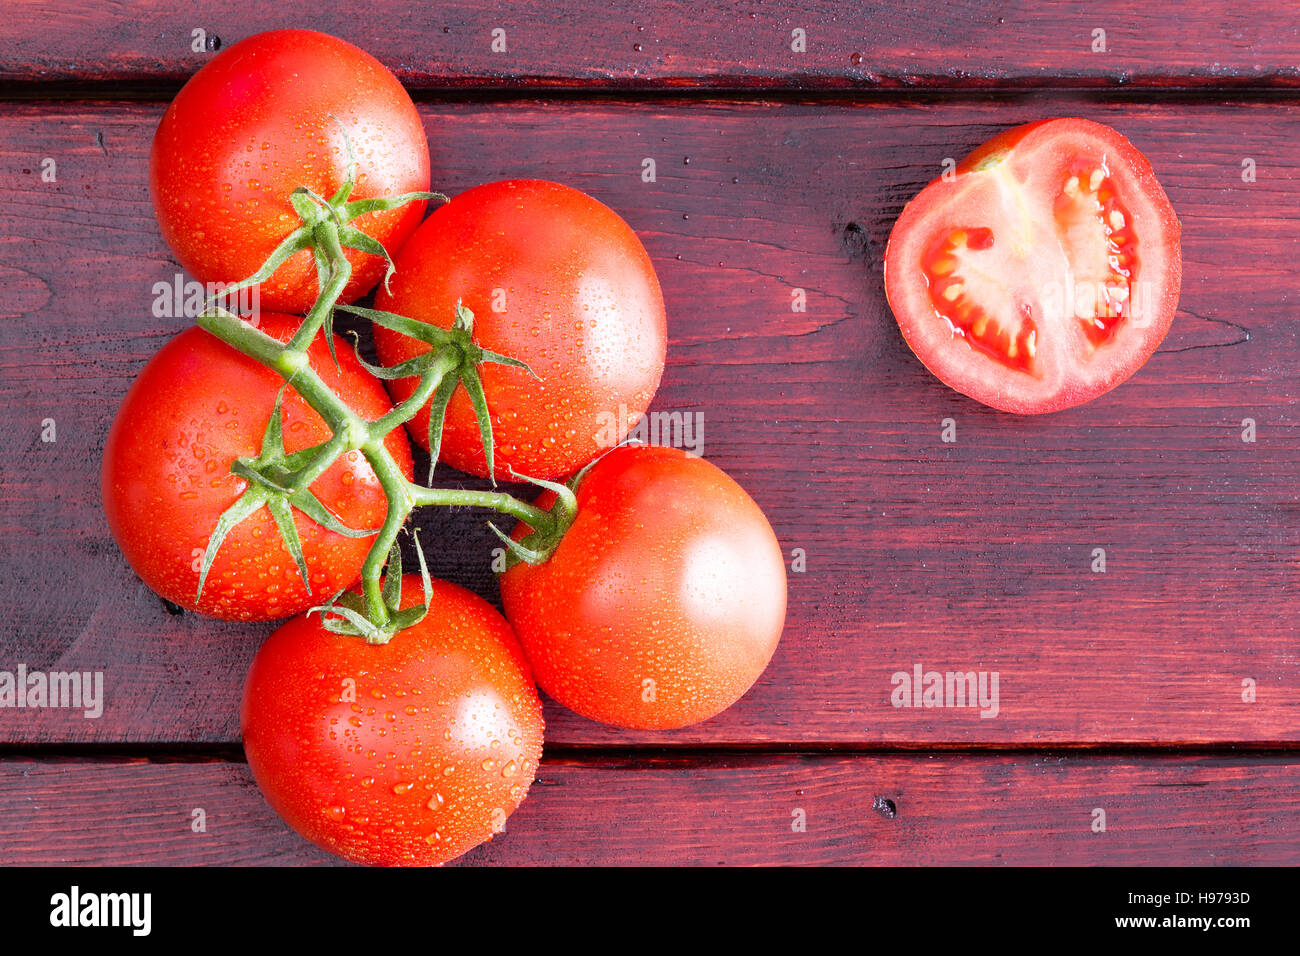 View from above on half of a tomato with moist cluster over dark stained table Stock Photo